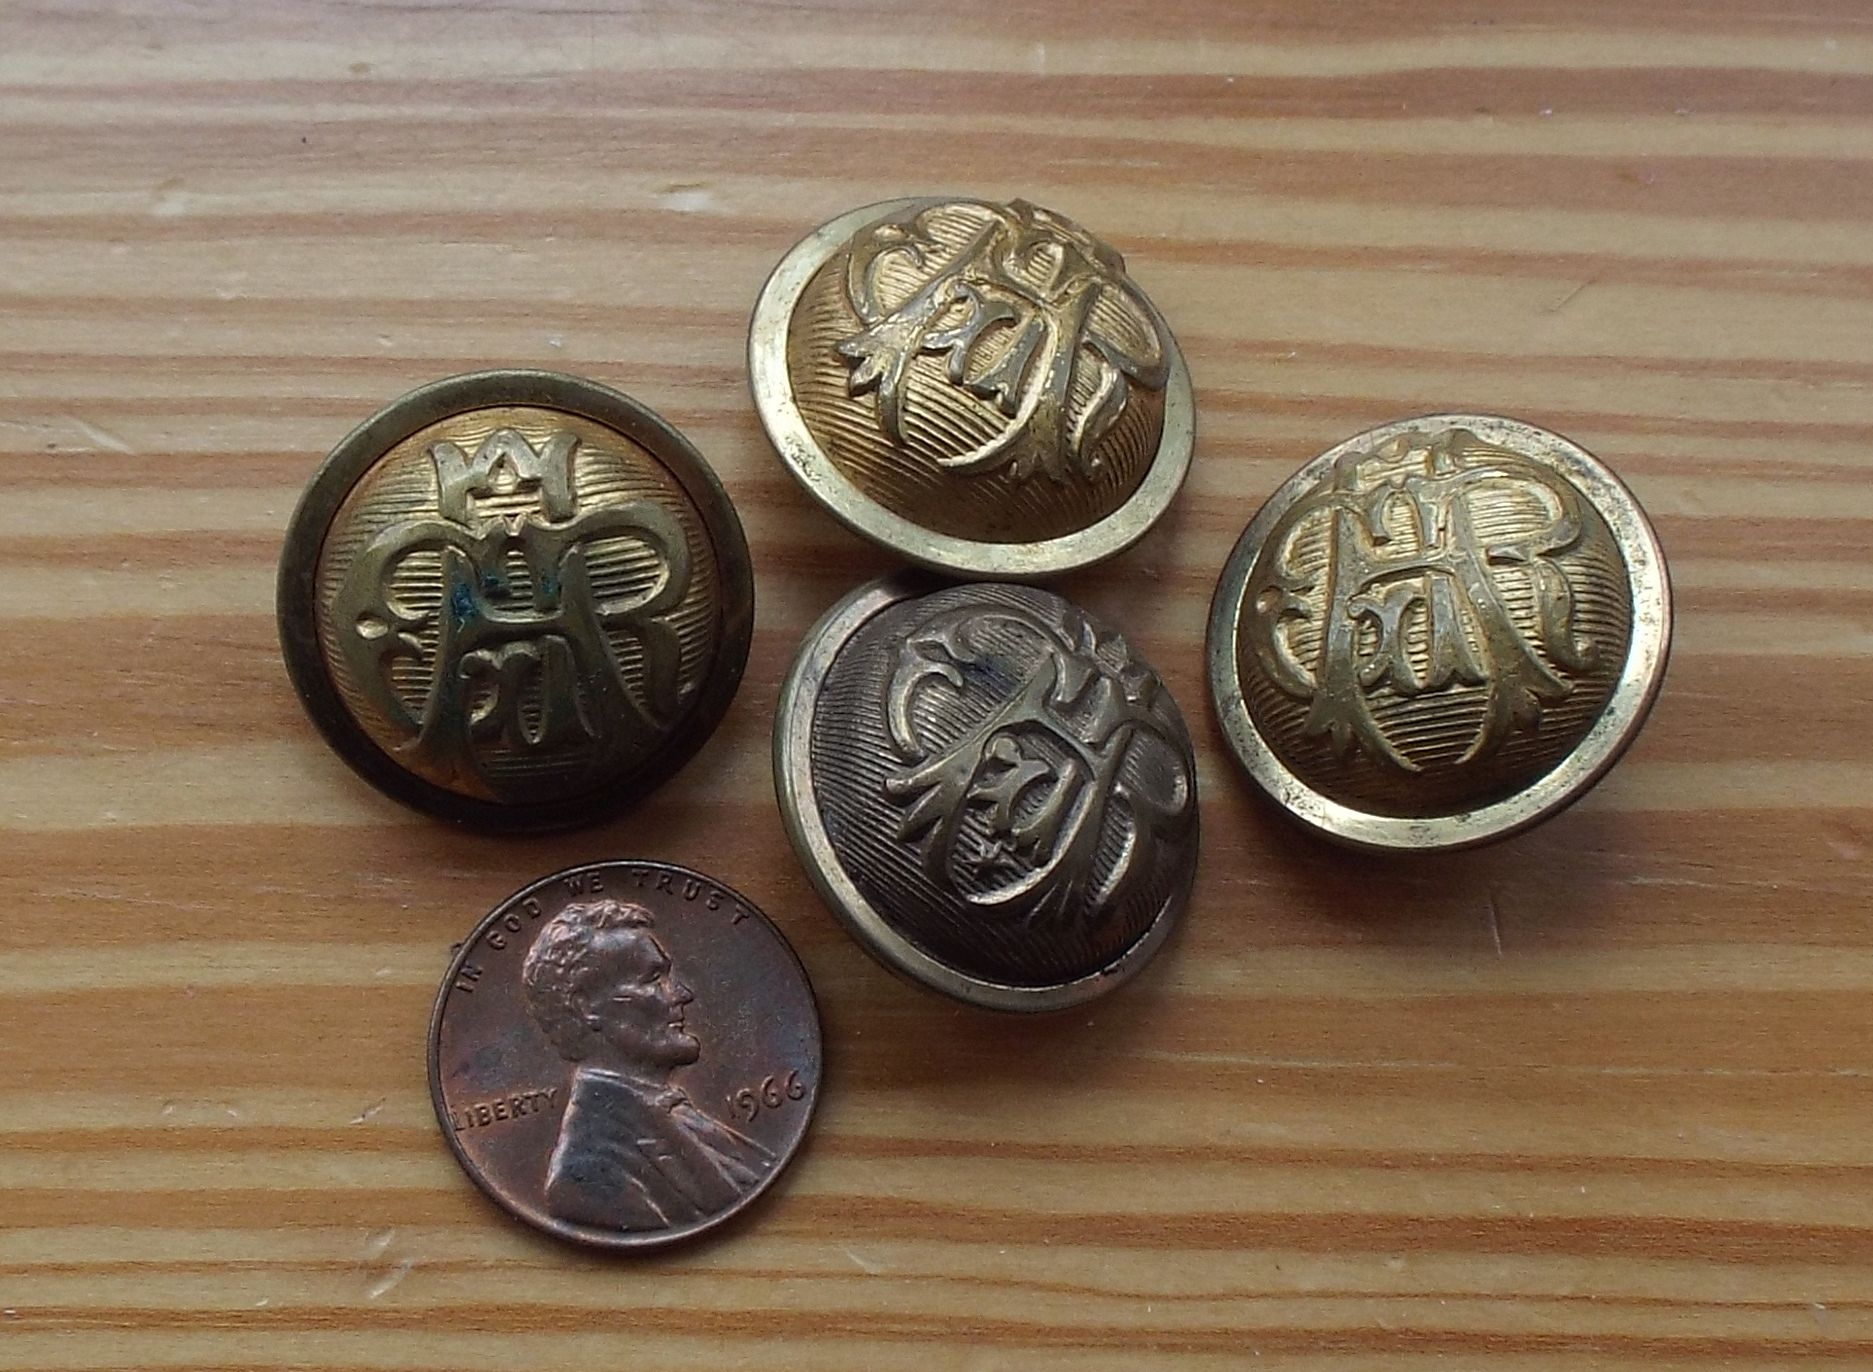 Who is/was this? Old buttons AER ERA monogram | Antiques Board